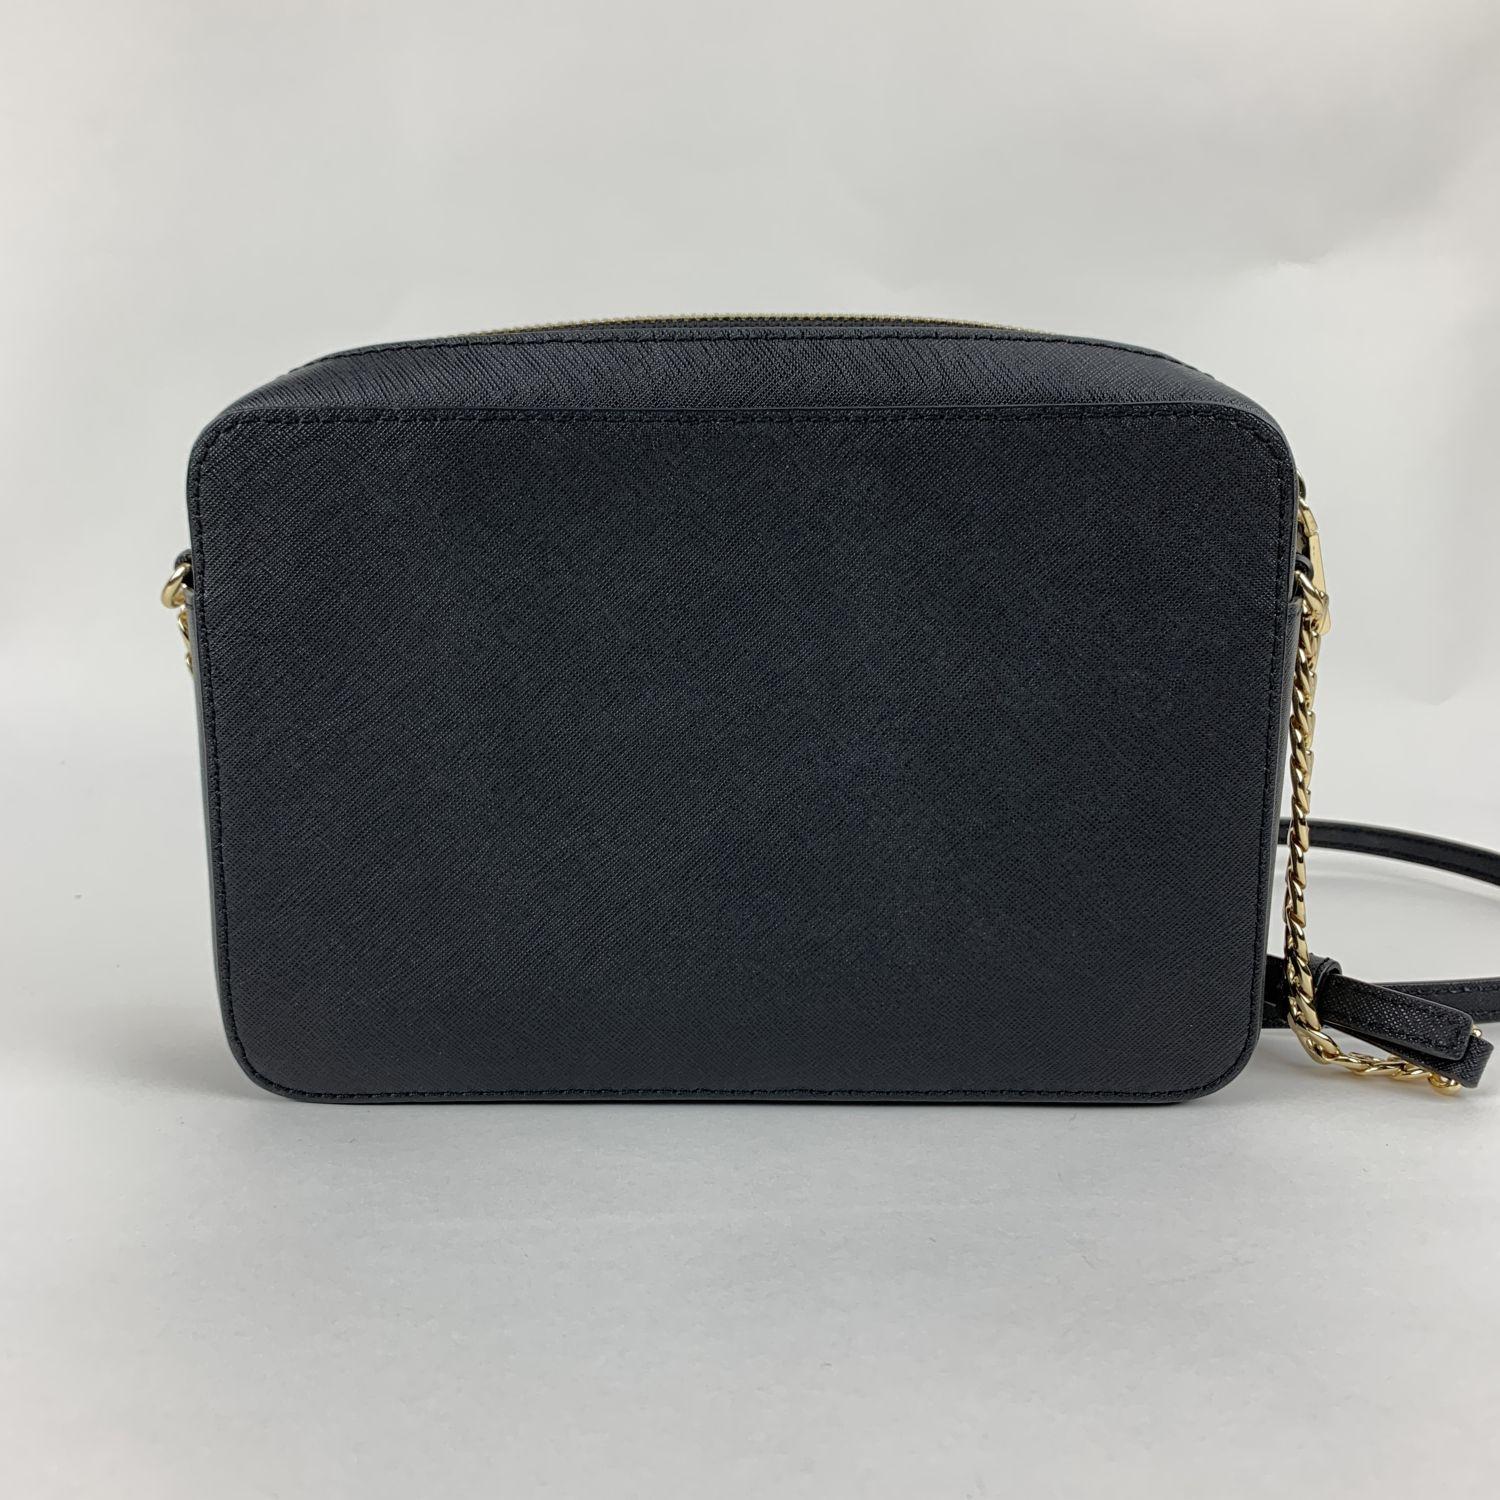 Michael Kors Black Saffiano Leather Jet Set Zip Crossbody Bag In Excellent Condition In Rome, Rome